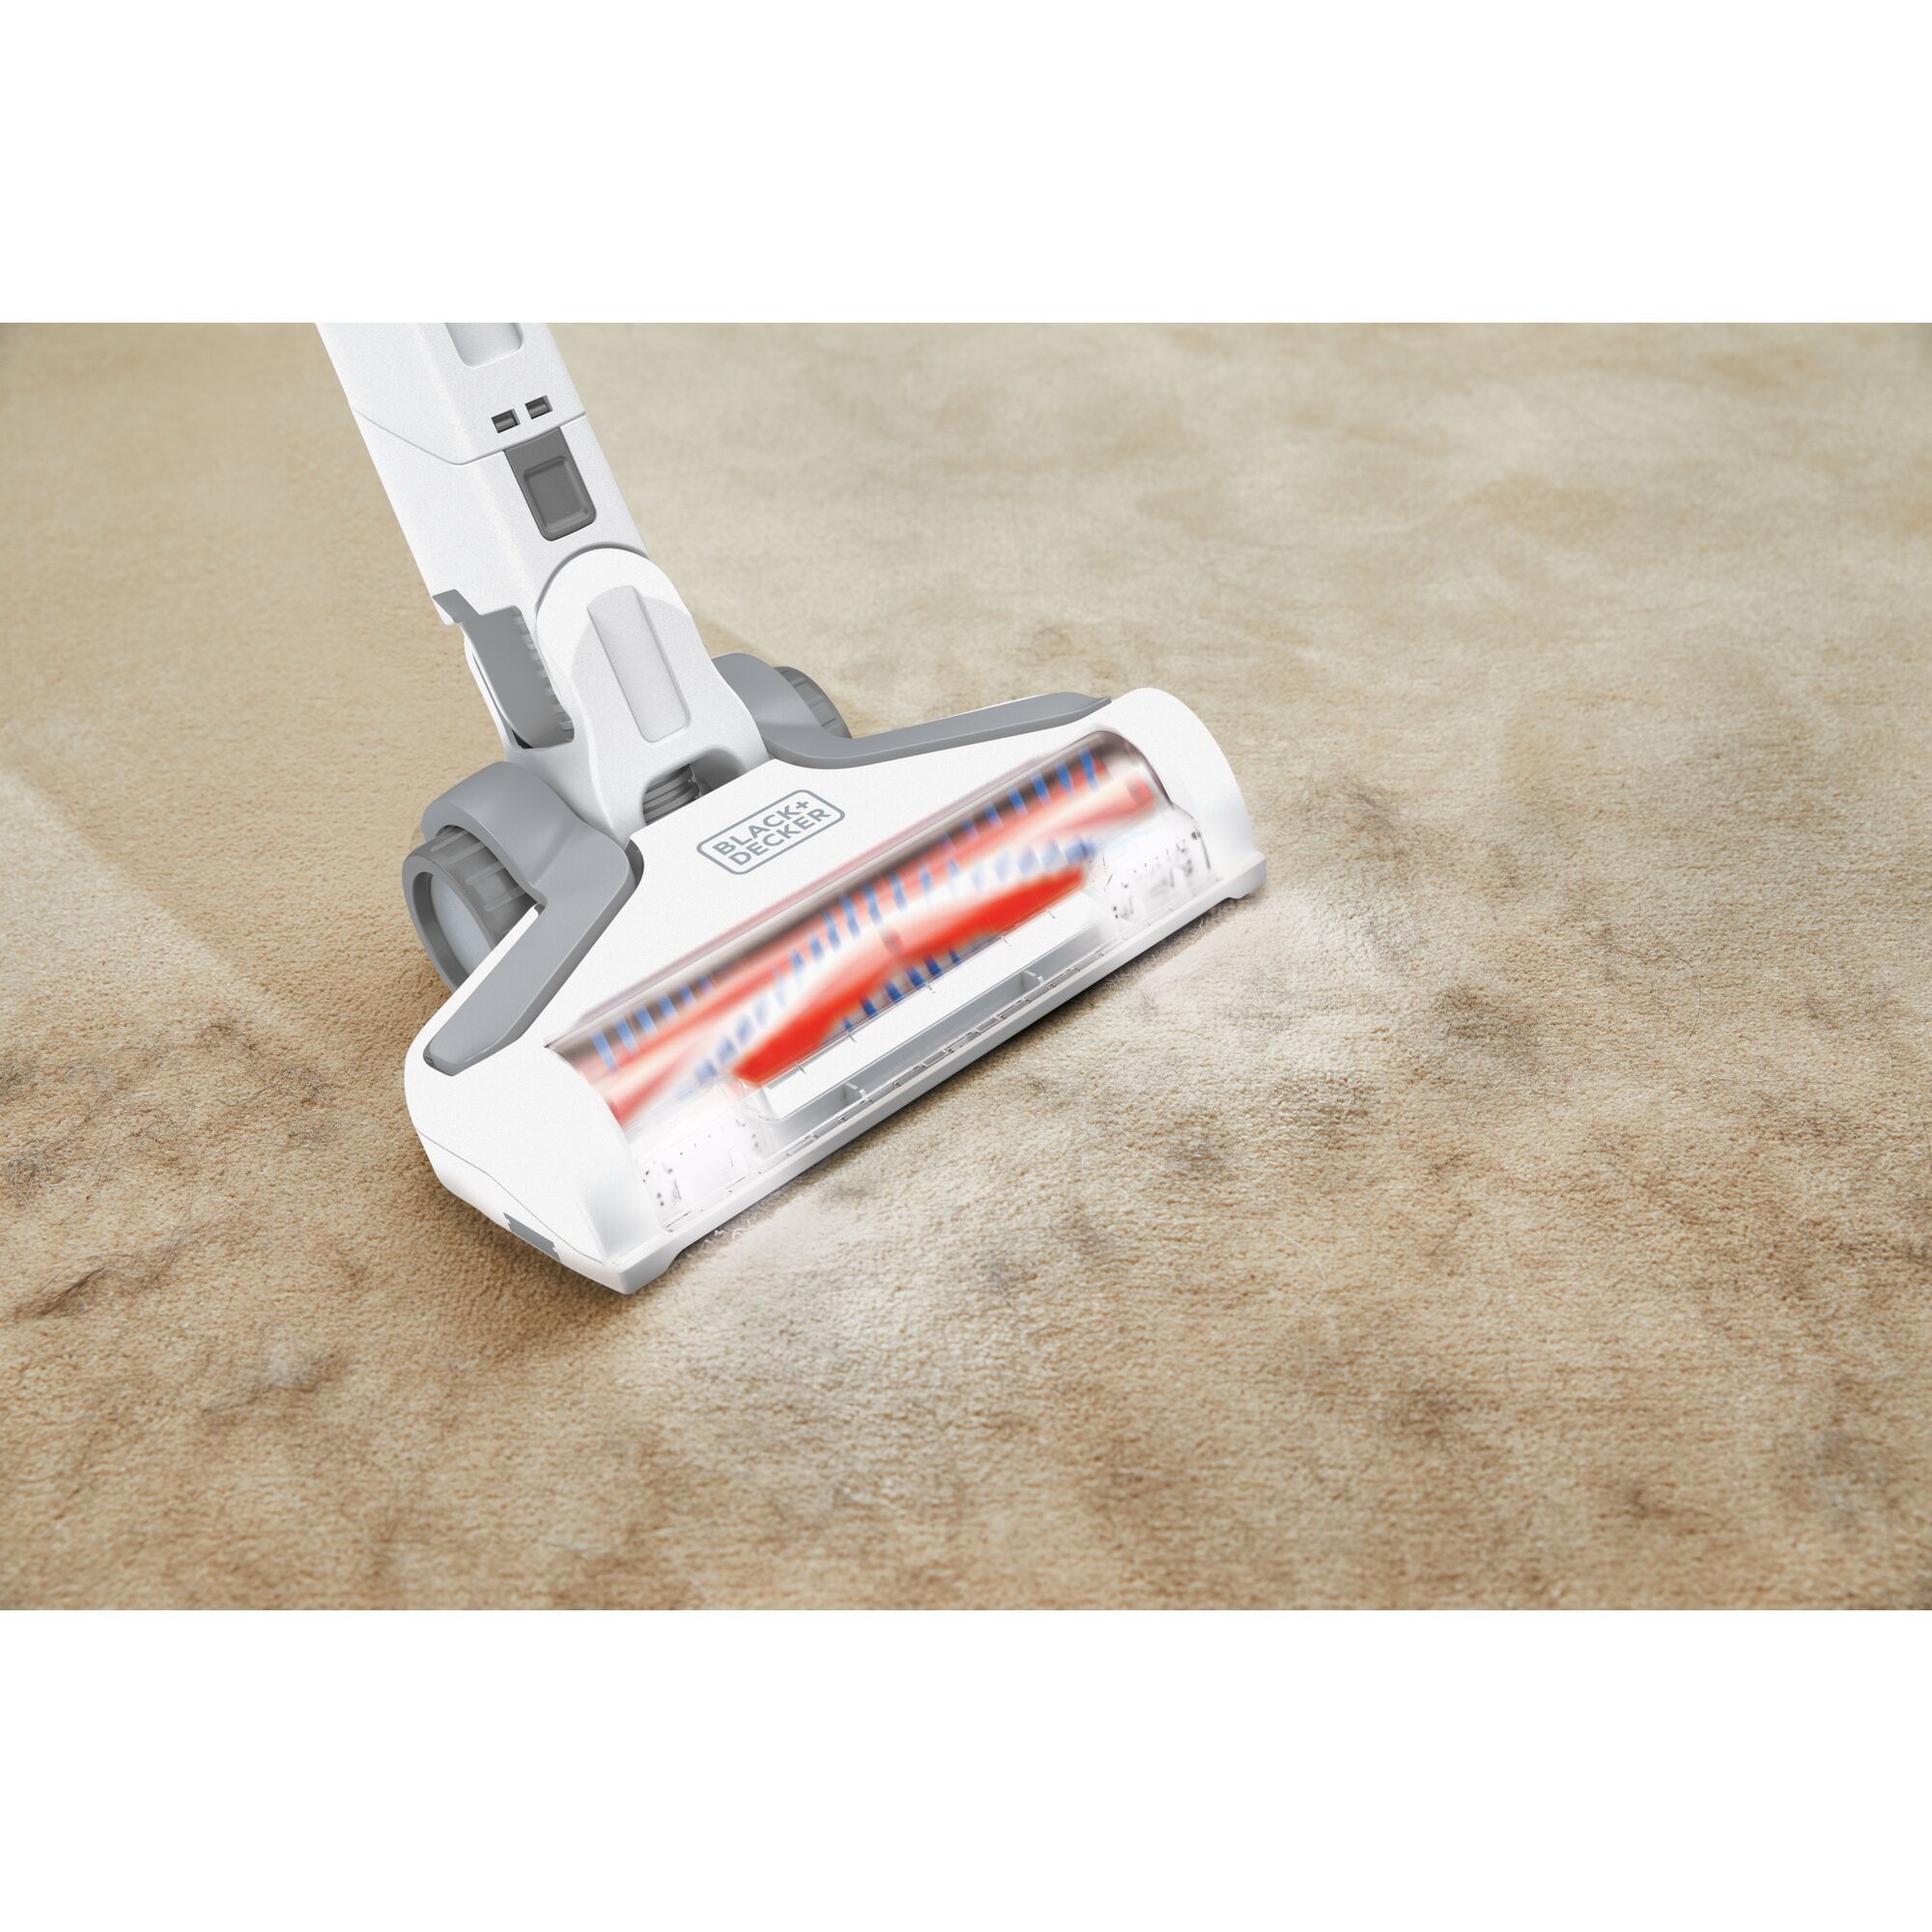 Power series extreme 20 volt max stick vacuum cleaning dust.